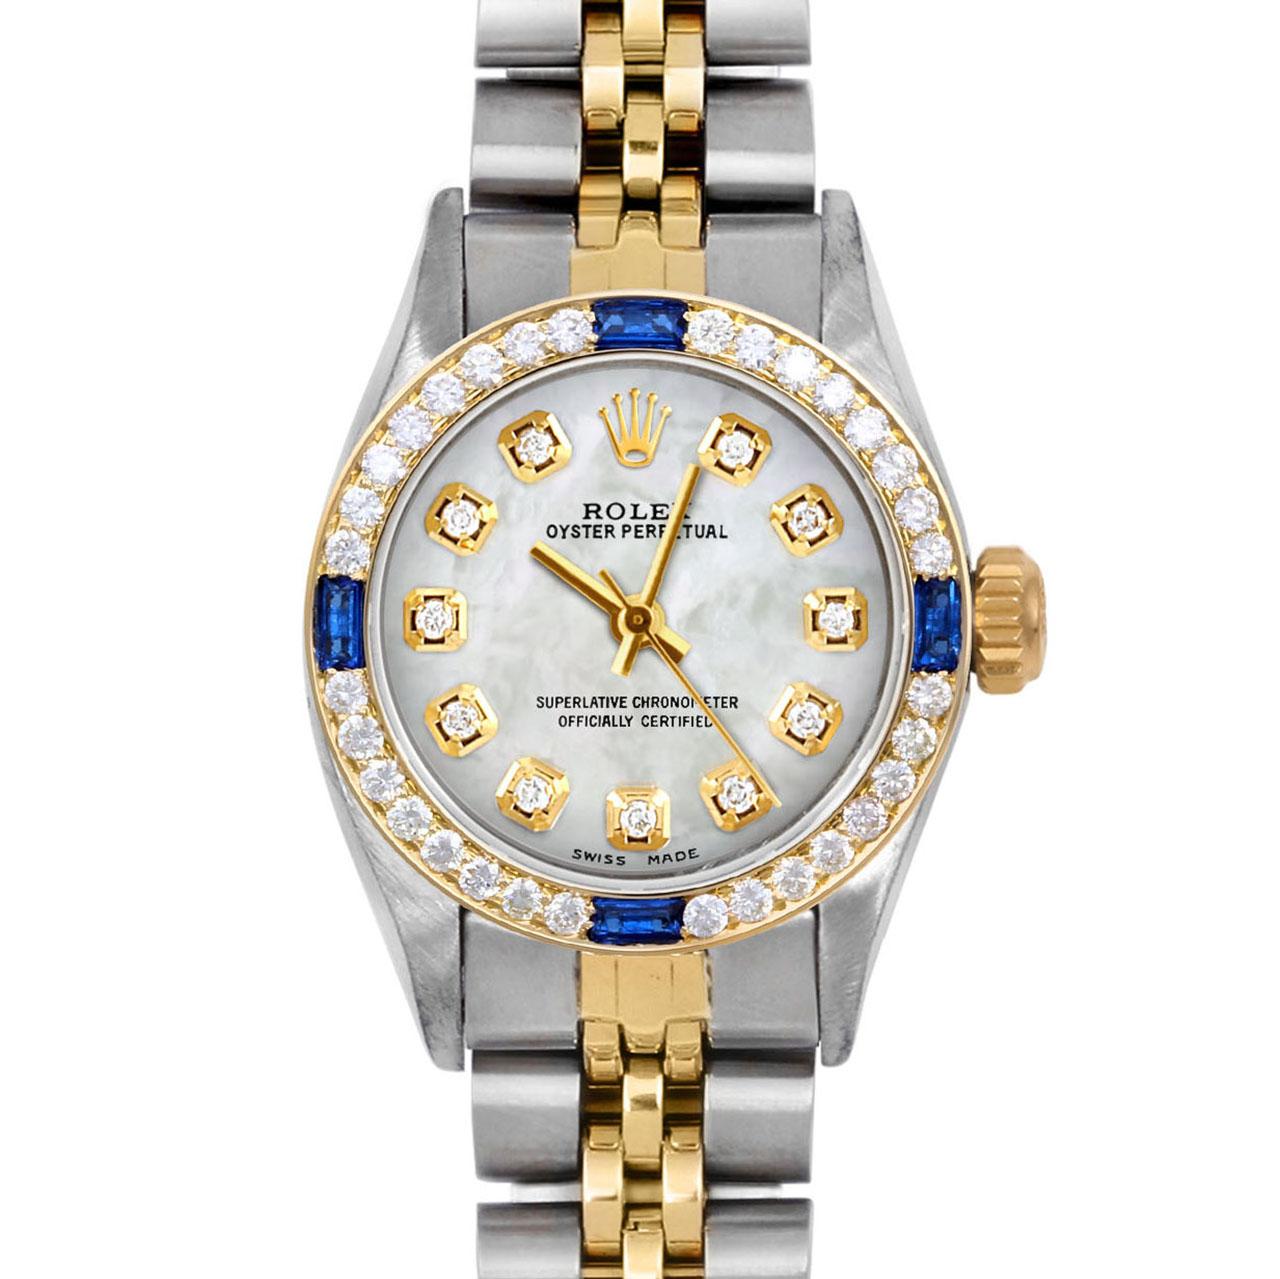 Brand : Rolex
Model : Oyster Perpetual 
Gender : Ladies
Metals : 14K Yellow Gold / Stainless Steel
Case Size : 24 mm
Dial : Custom Mother Of Pearl Diamond Dial (This dial is not original Rolex And has been added aftermarket yet is a beautiful Custom